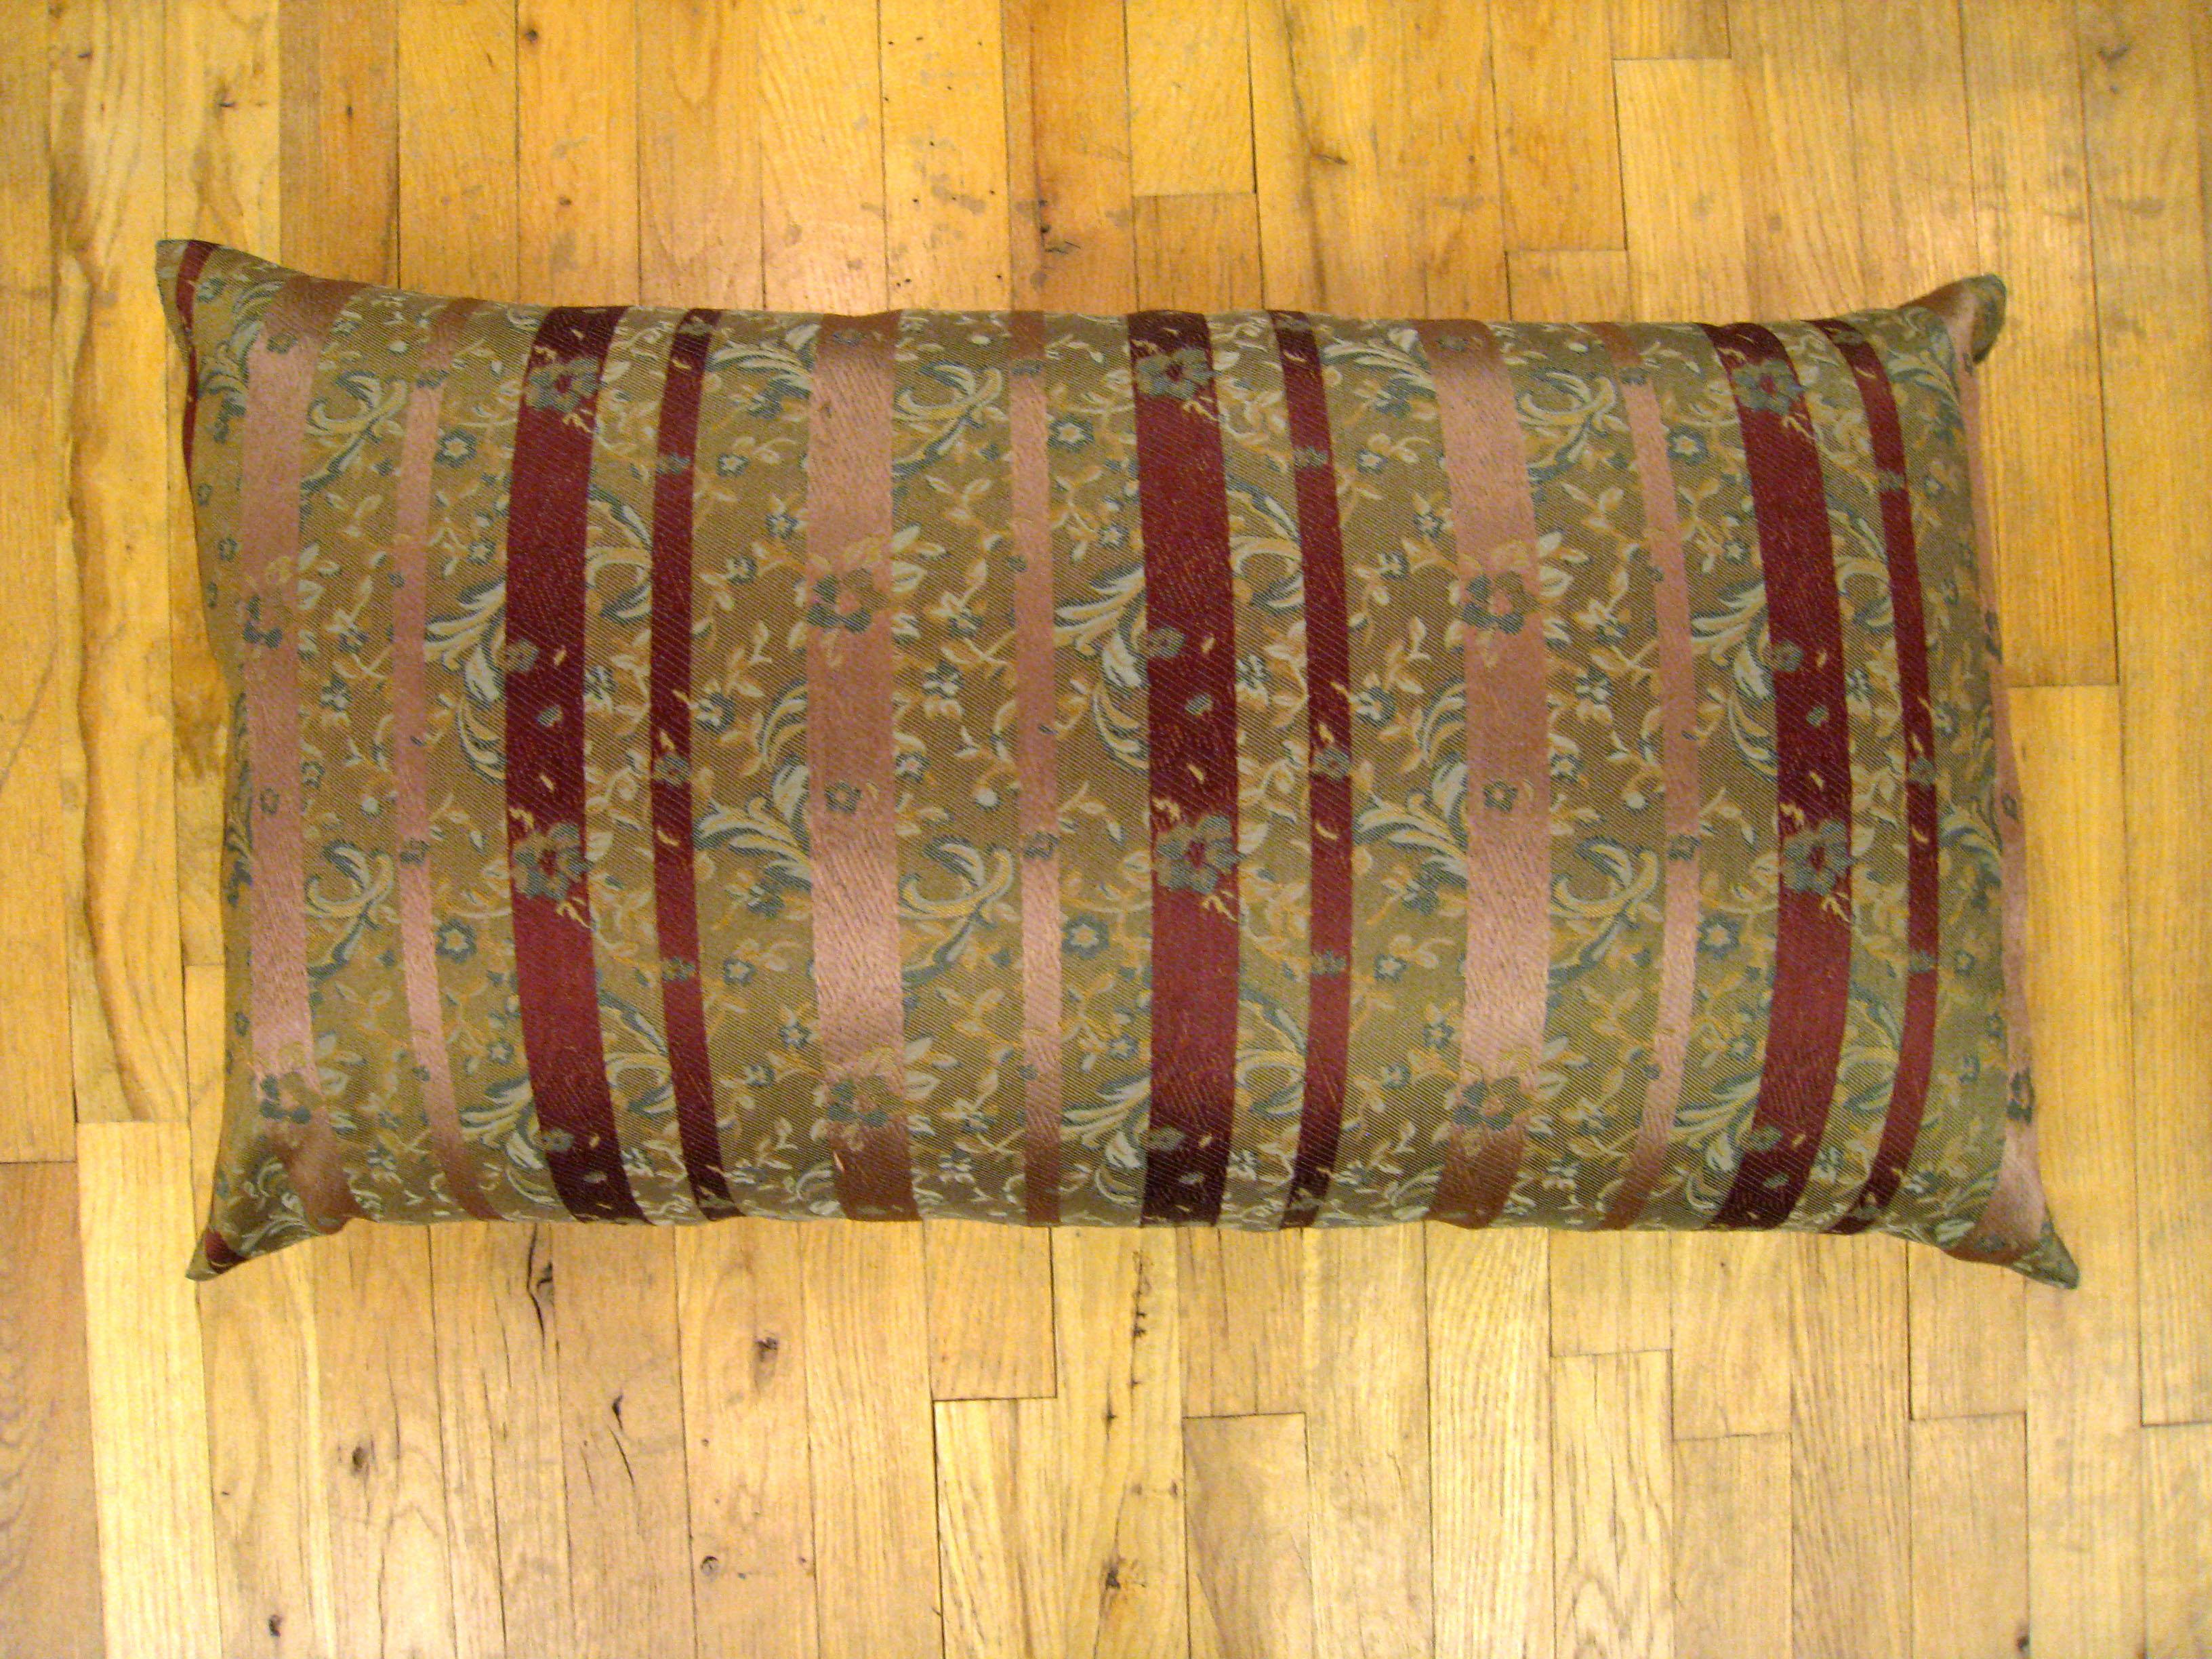 Pair of Large Decorative Satin Pillows w/ Vintage Striped Brocade on Both Sides For Sale 2